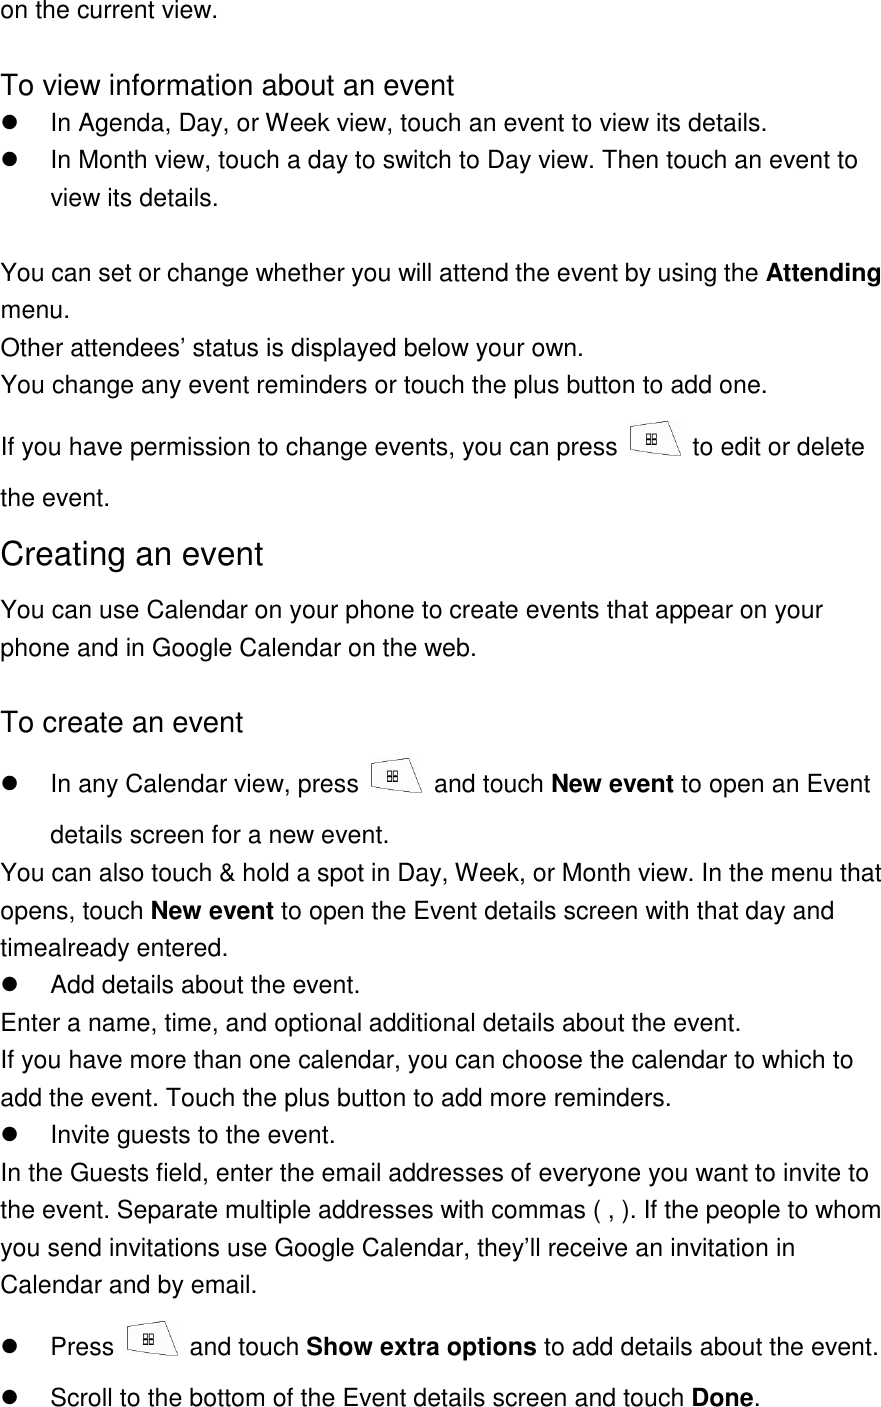 on the current view.  To view information about an event   In Agenda, Day, or Week view, touch an event to view its details.   In Month view, touch a day to switch to Day view. Then touch an event to view its details.  You can set or change whether you will attend the event by using the Attending menu. Other attendees’ status is displayed below your own. You change any event reminders or touch the plus button to add one.   If you have permission to change events, you can press    to edit or delete the event. Creating an event You can use Calendar on your phone to create events that appear on your phone and in Google Calendar on the web.  To create an event   In any Calendar view, press    and touch New event to open an Event details screen for a new event. You can also touch &amp; hold a spot in Day, Week, or Month view. In the menu that opens, touch New event to open the Event details screen with that day and timealready entered.   Add details about the event. Enter a name, time, and optional additional details about the event. If you have more than one calendar, you can choose the calendar to which to add the event. Touch the plus button to add more reminders.     Invite guests to the event. In the Guests field, enter the email addresses of everyone you want to invite to the event. Separate multiple addresses with commas ( , ). If the people to whom you send invitations use Google Calendar, they’ll receive an invitation in Calendar and by email.   Press    and touch Show extra options to add details about the event.   Scroll to the bottom of the Event details screen and touch Done. 